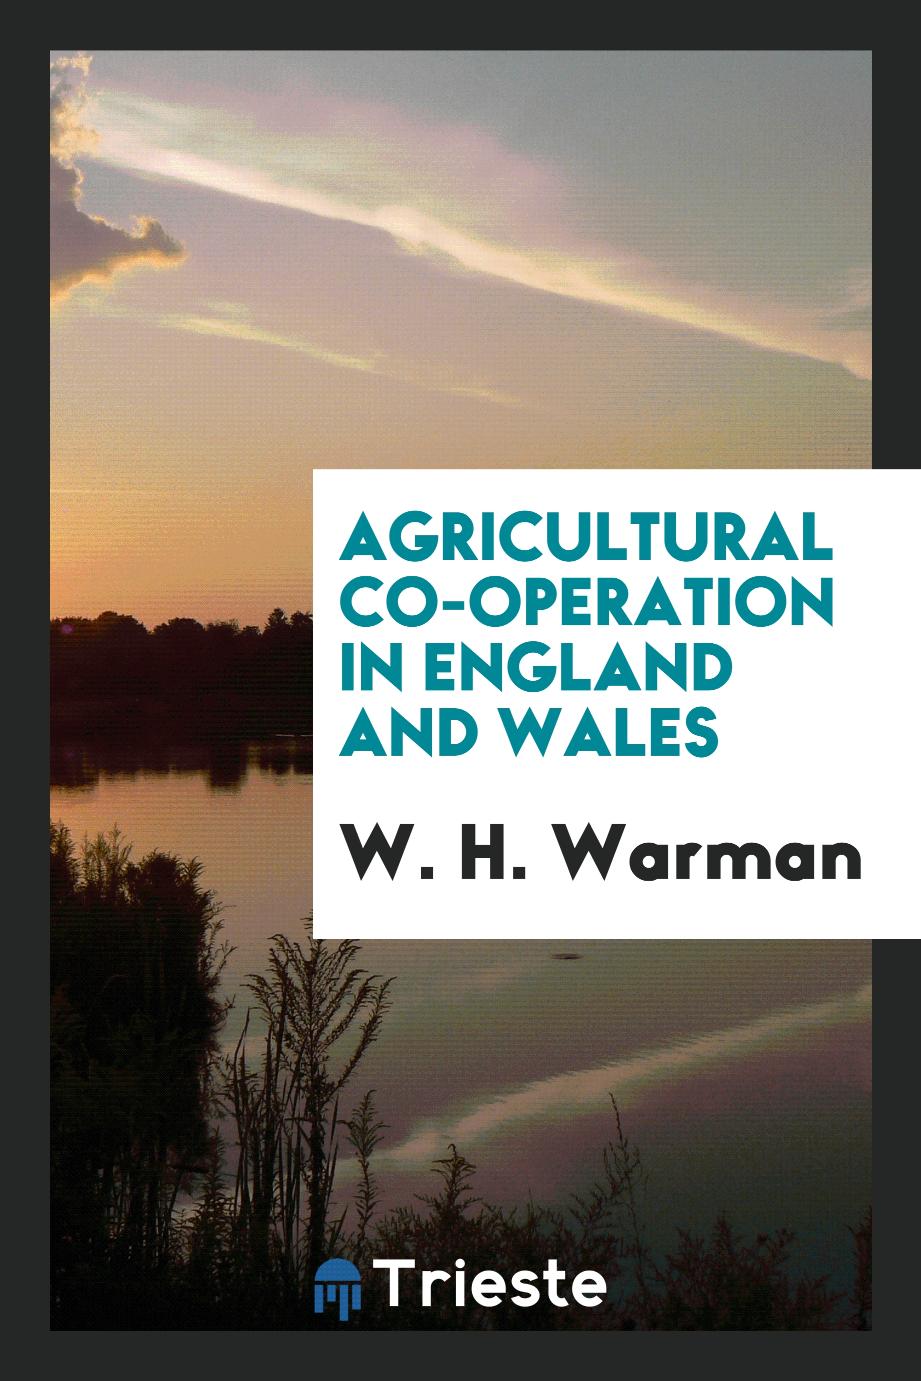 Agricultural co-operation in England and Wales